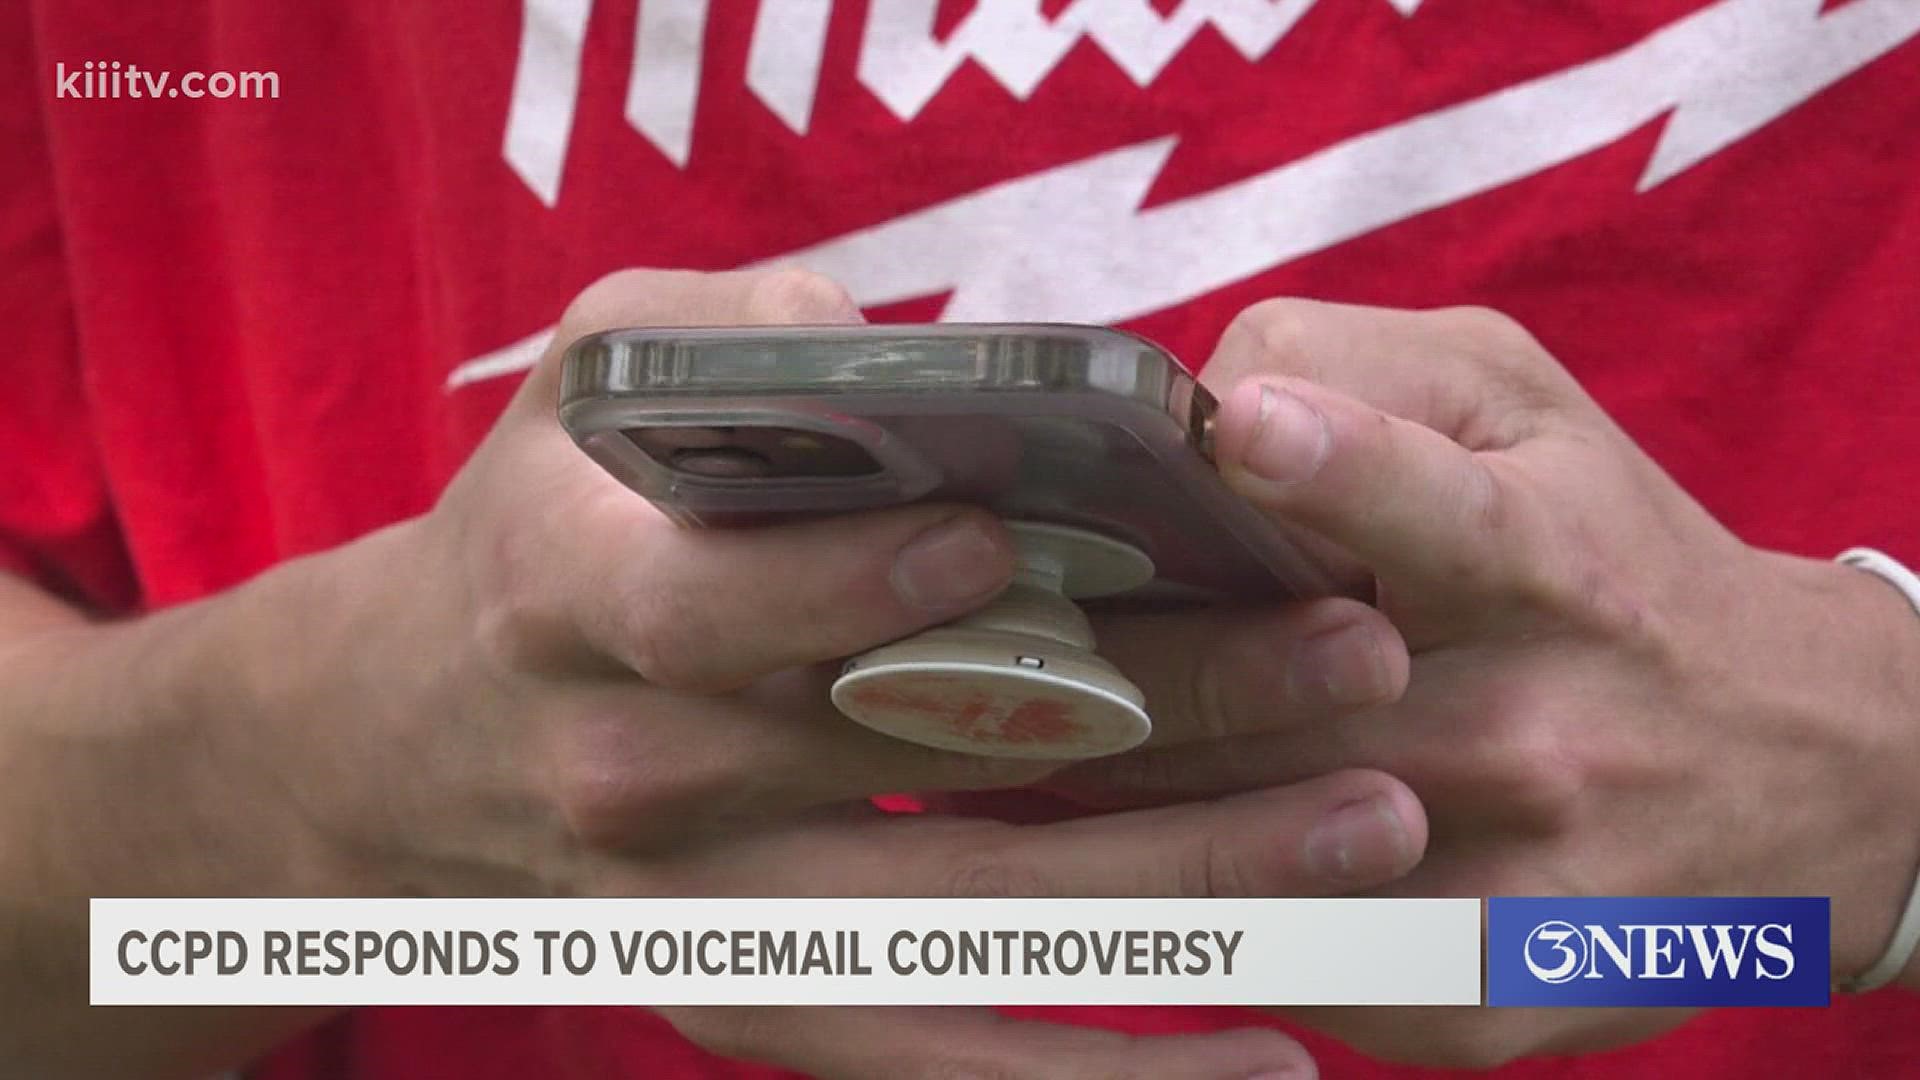 Coastal Bend resident Ezra Alaniz called the CCPD non emergency number only to receive a disparaging voicemail.